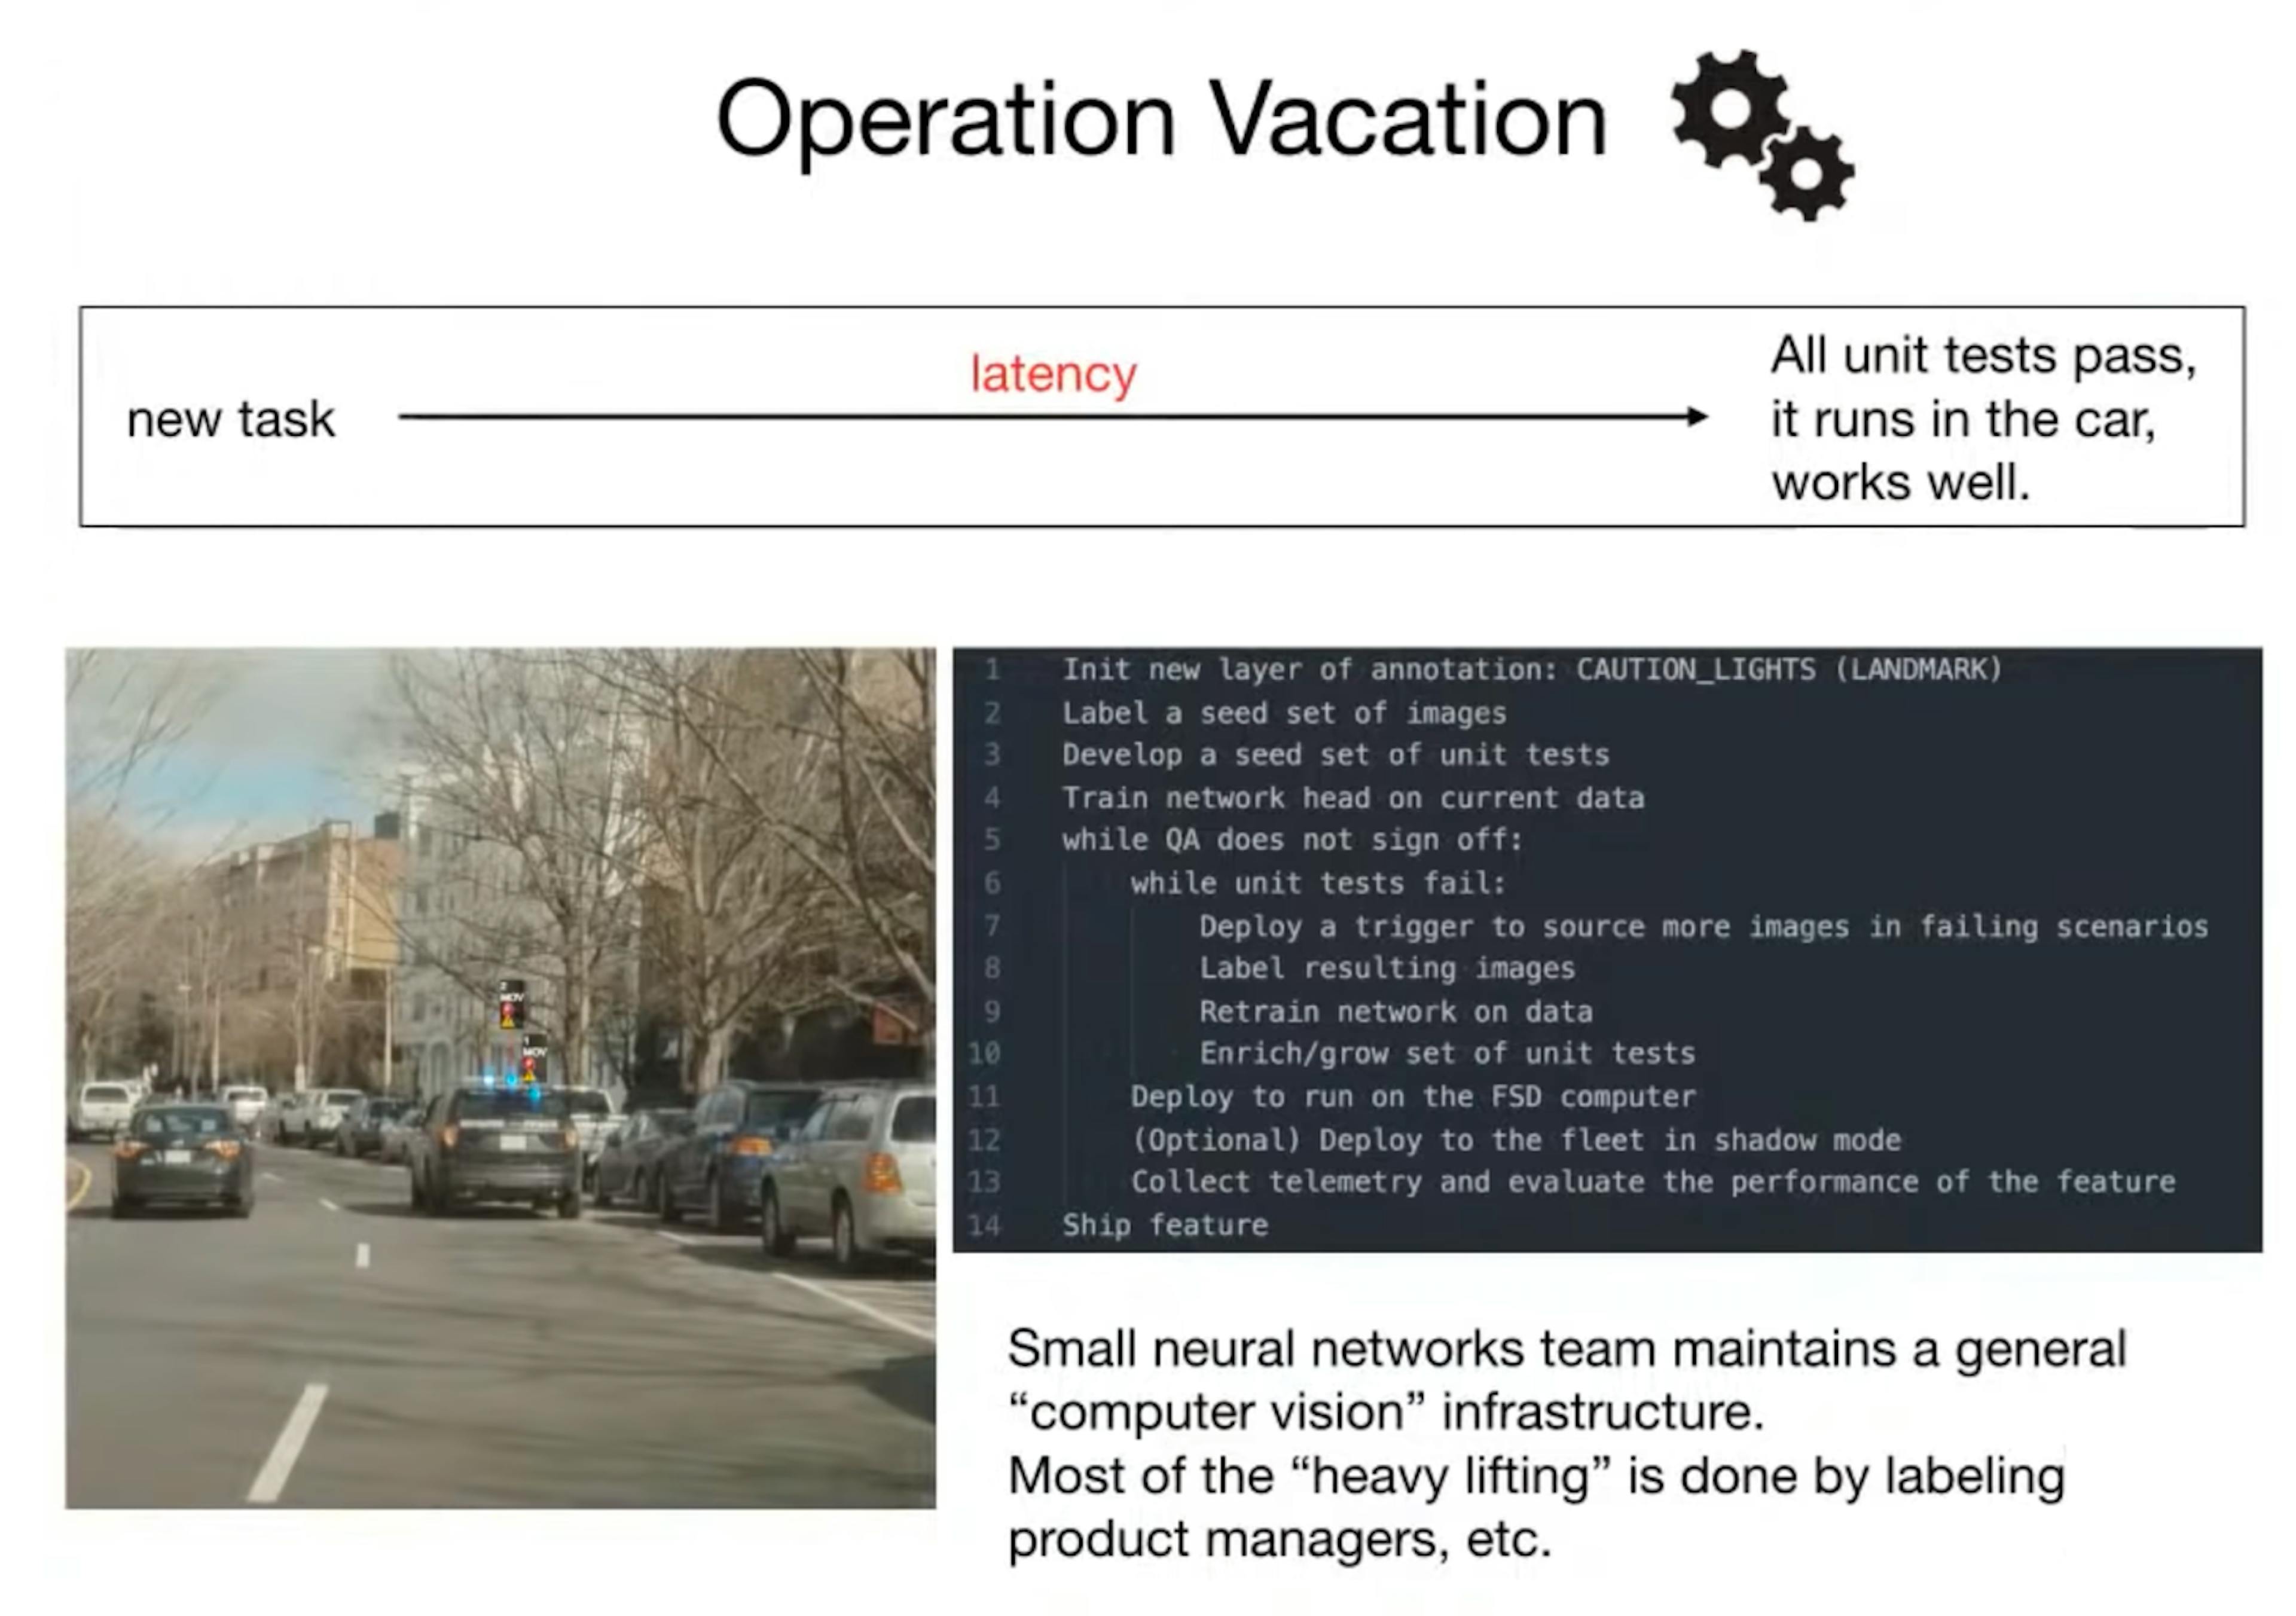 Description of “Operation Vacation”, the process by which the Tesla self-driving team collects and improves their data through labeling and testing. Taken from Andrej Karpathy’s 2020 talk, “AI for Full Self-Driving at Tesla”.